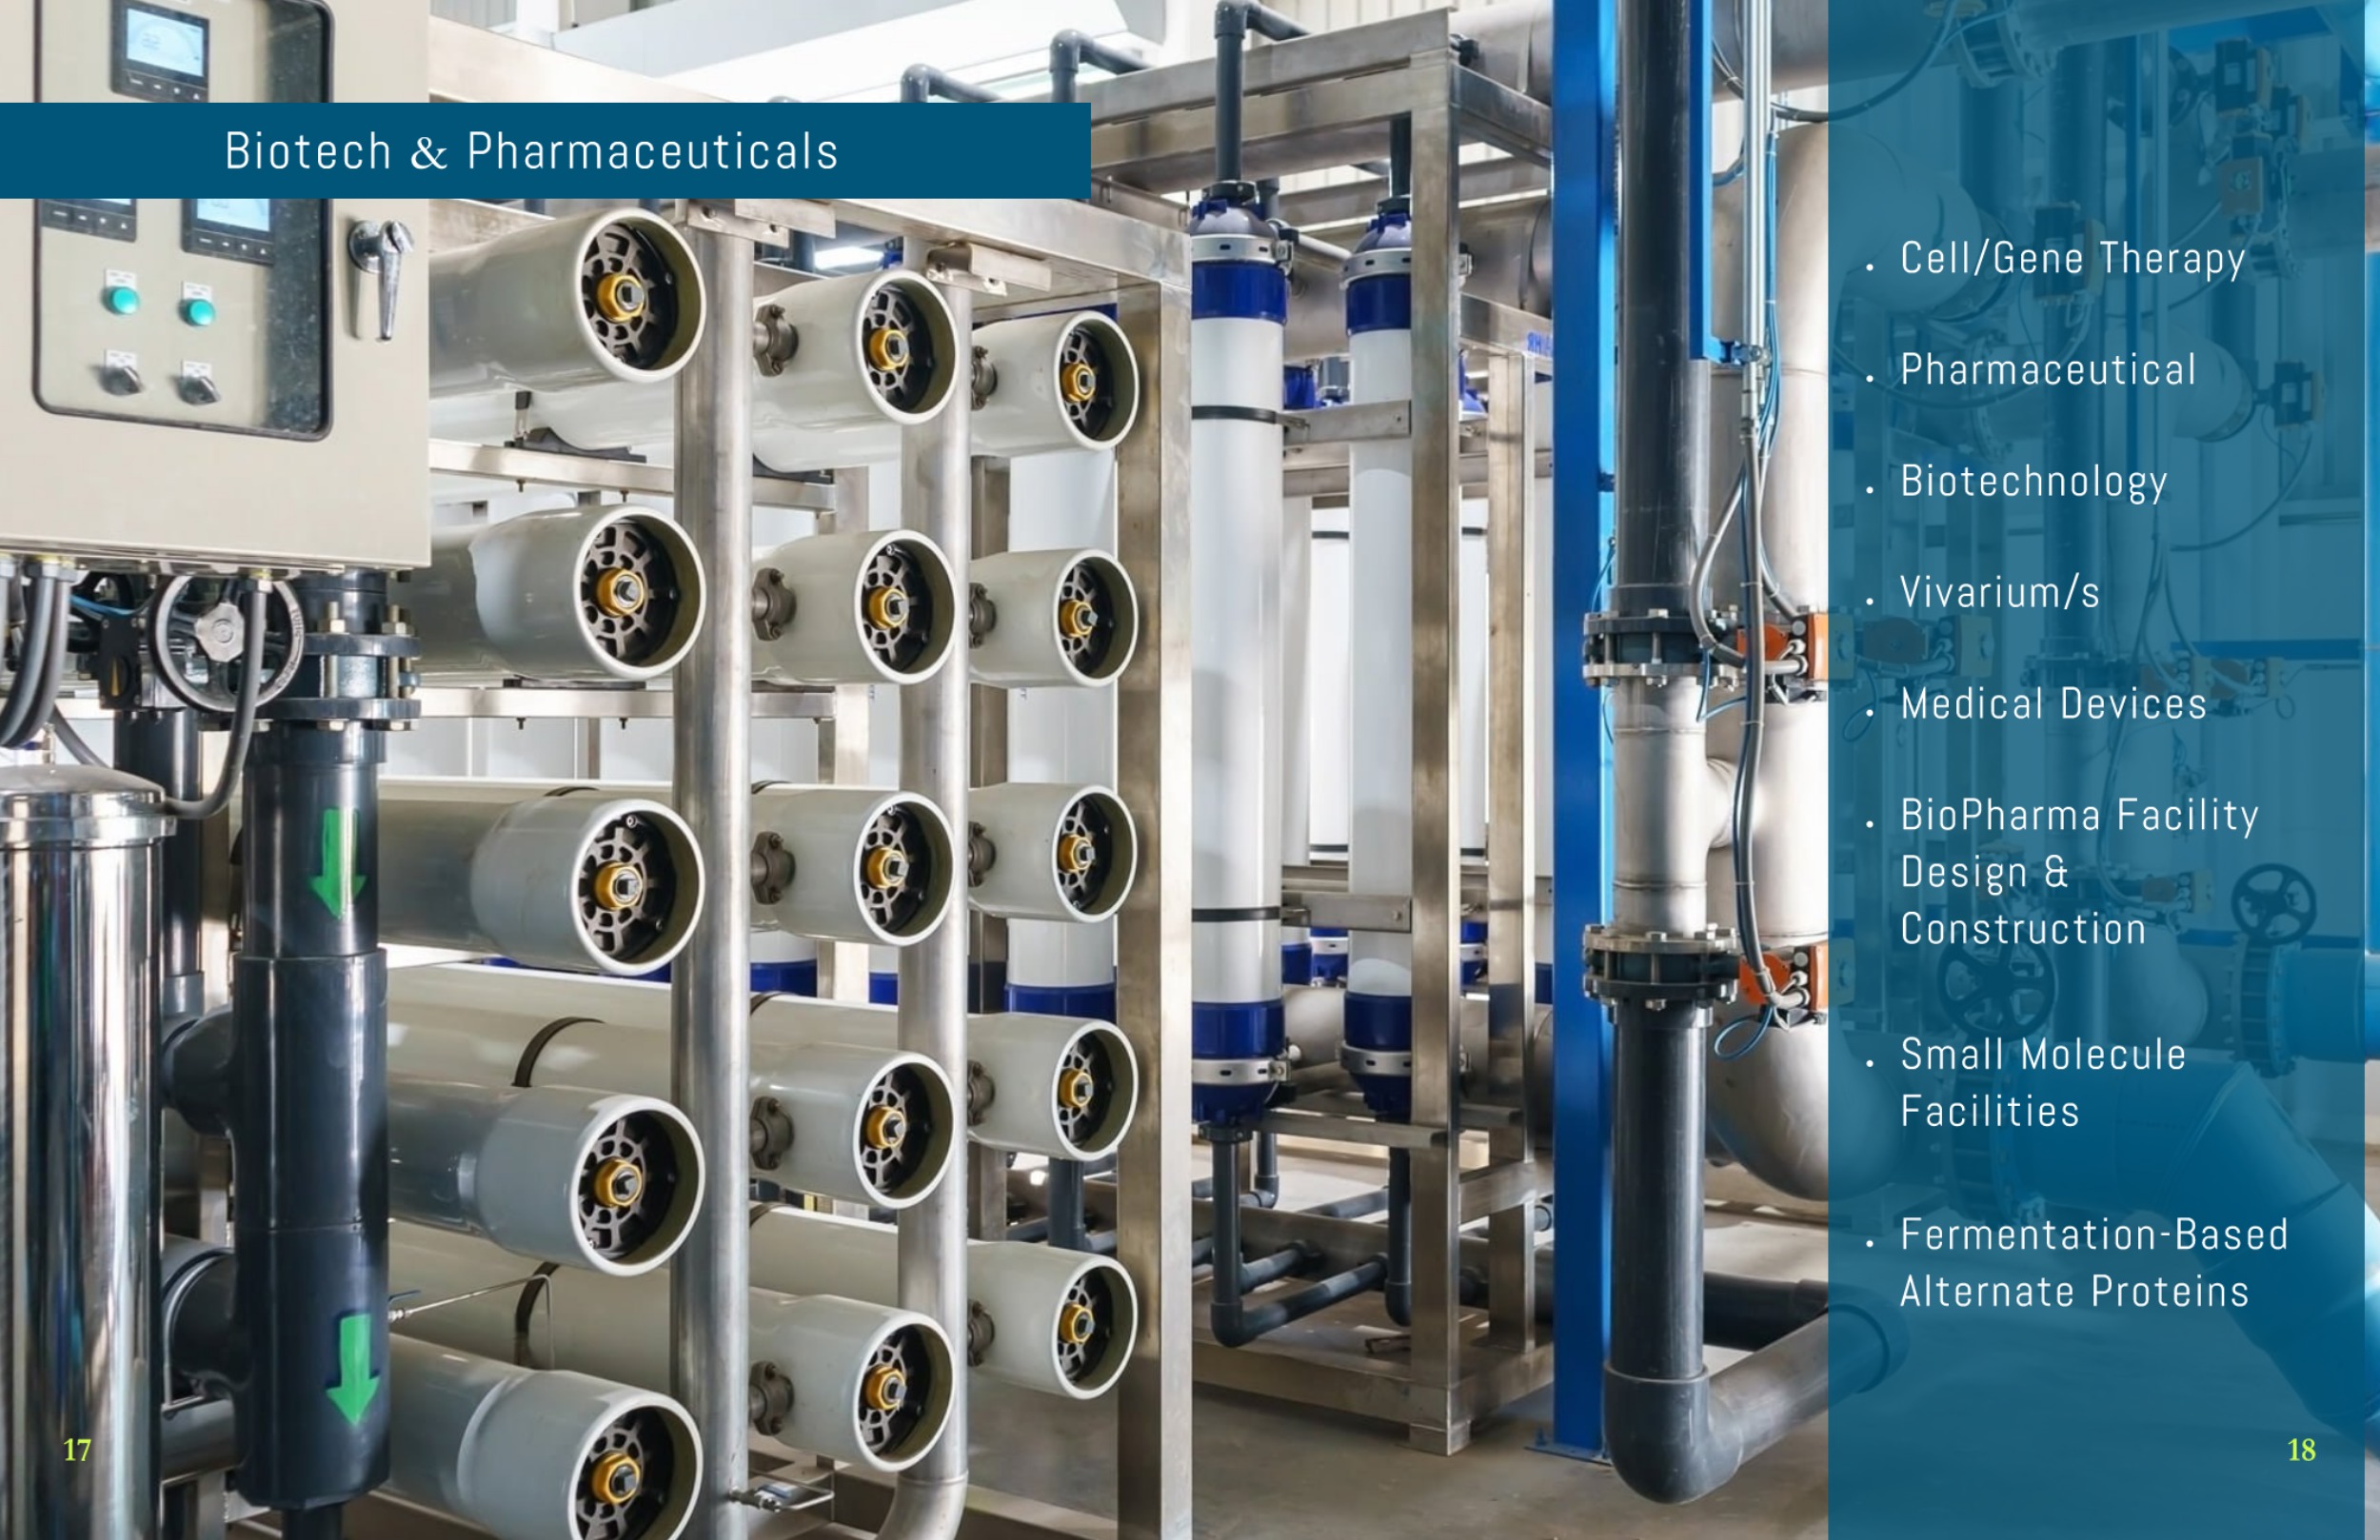 IPS Capabilities Booklet spread for Biotech and Pharmaceutical services including cell-gene therapy, pharmaceutical, biotechnology, vivariums, medical devices, BioPharma facility design and construction, small molecule facilities, fermentation-based alternate proteins.